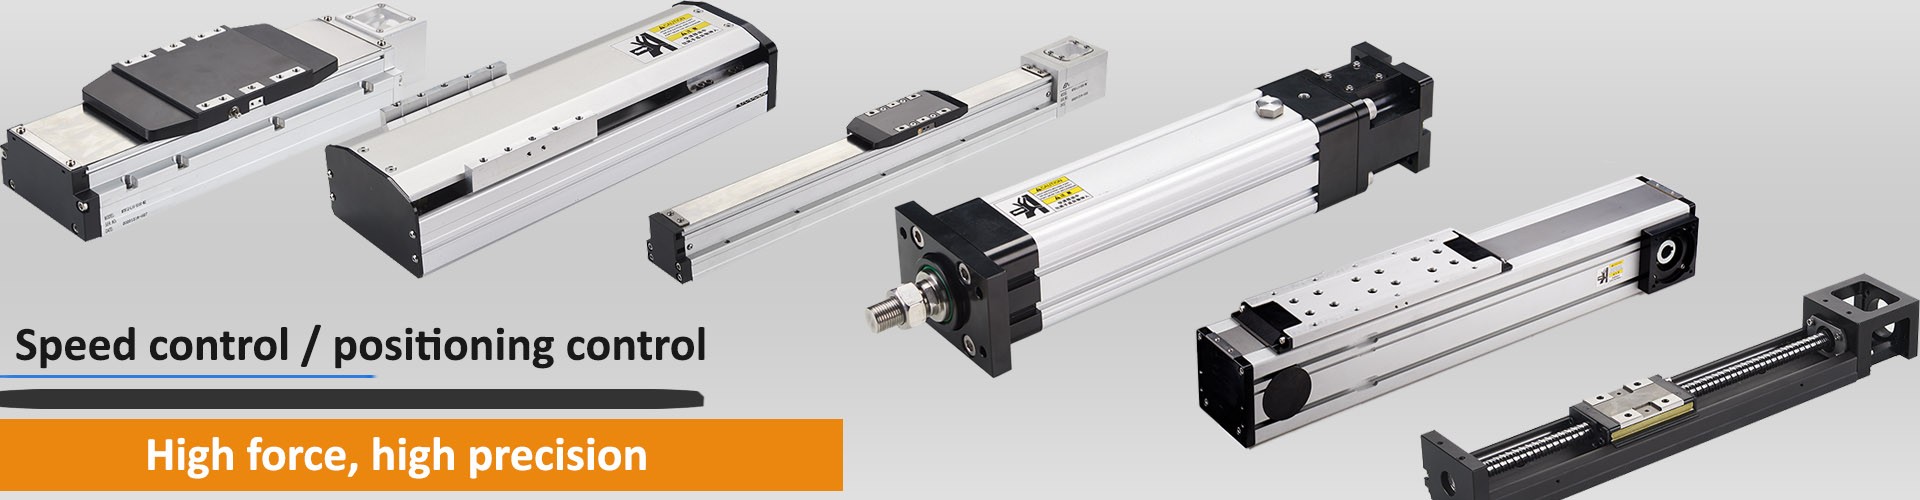 Servo Actuators: How They Work and Their Applications